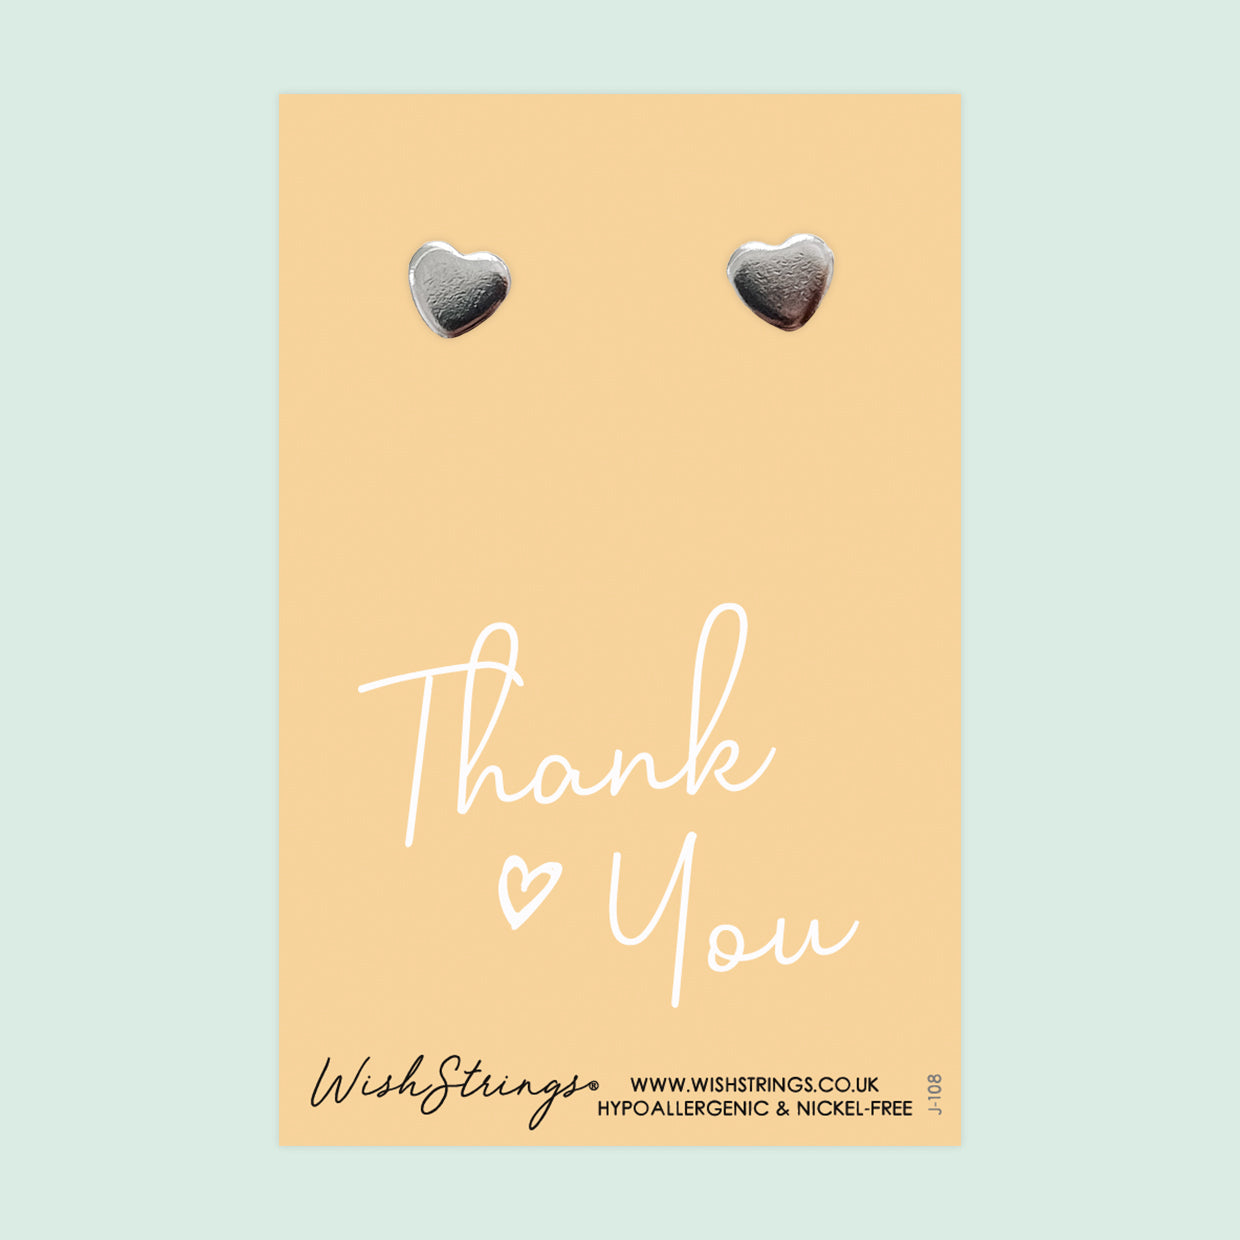 Thank You - Silver Heart Stud Earrings | 304 Stainless - Hypoallergenic